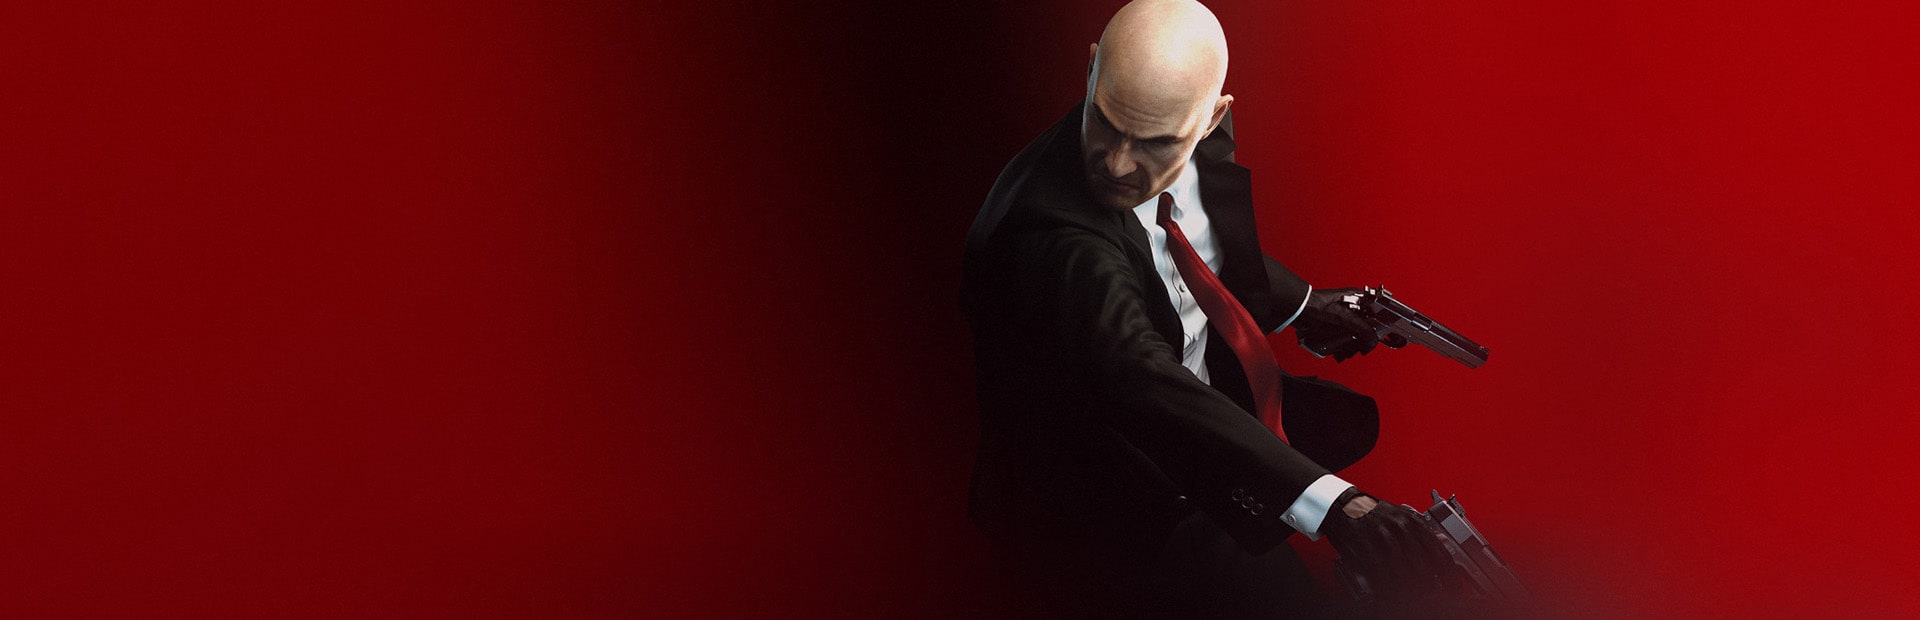 Hitman: Absolution Review - The Masterful Stealth Game Returns